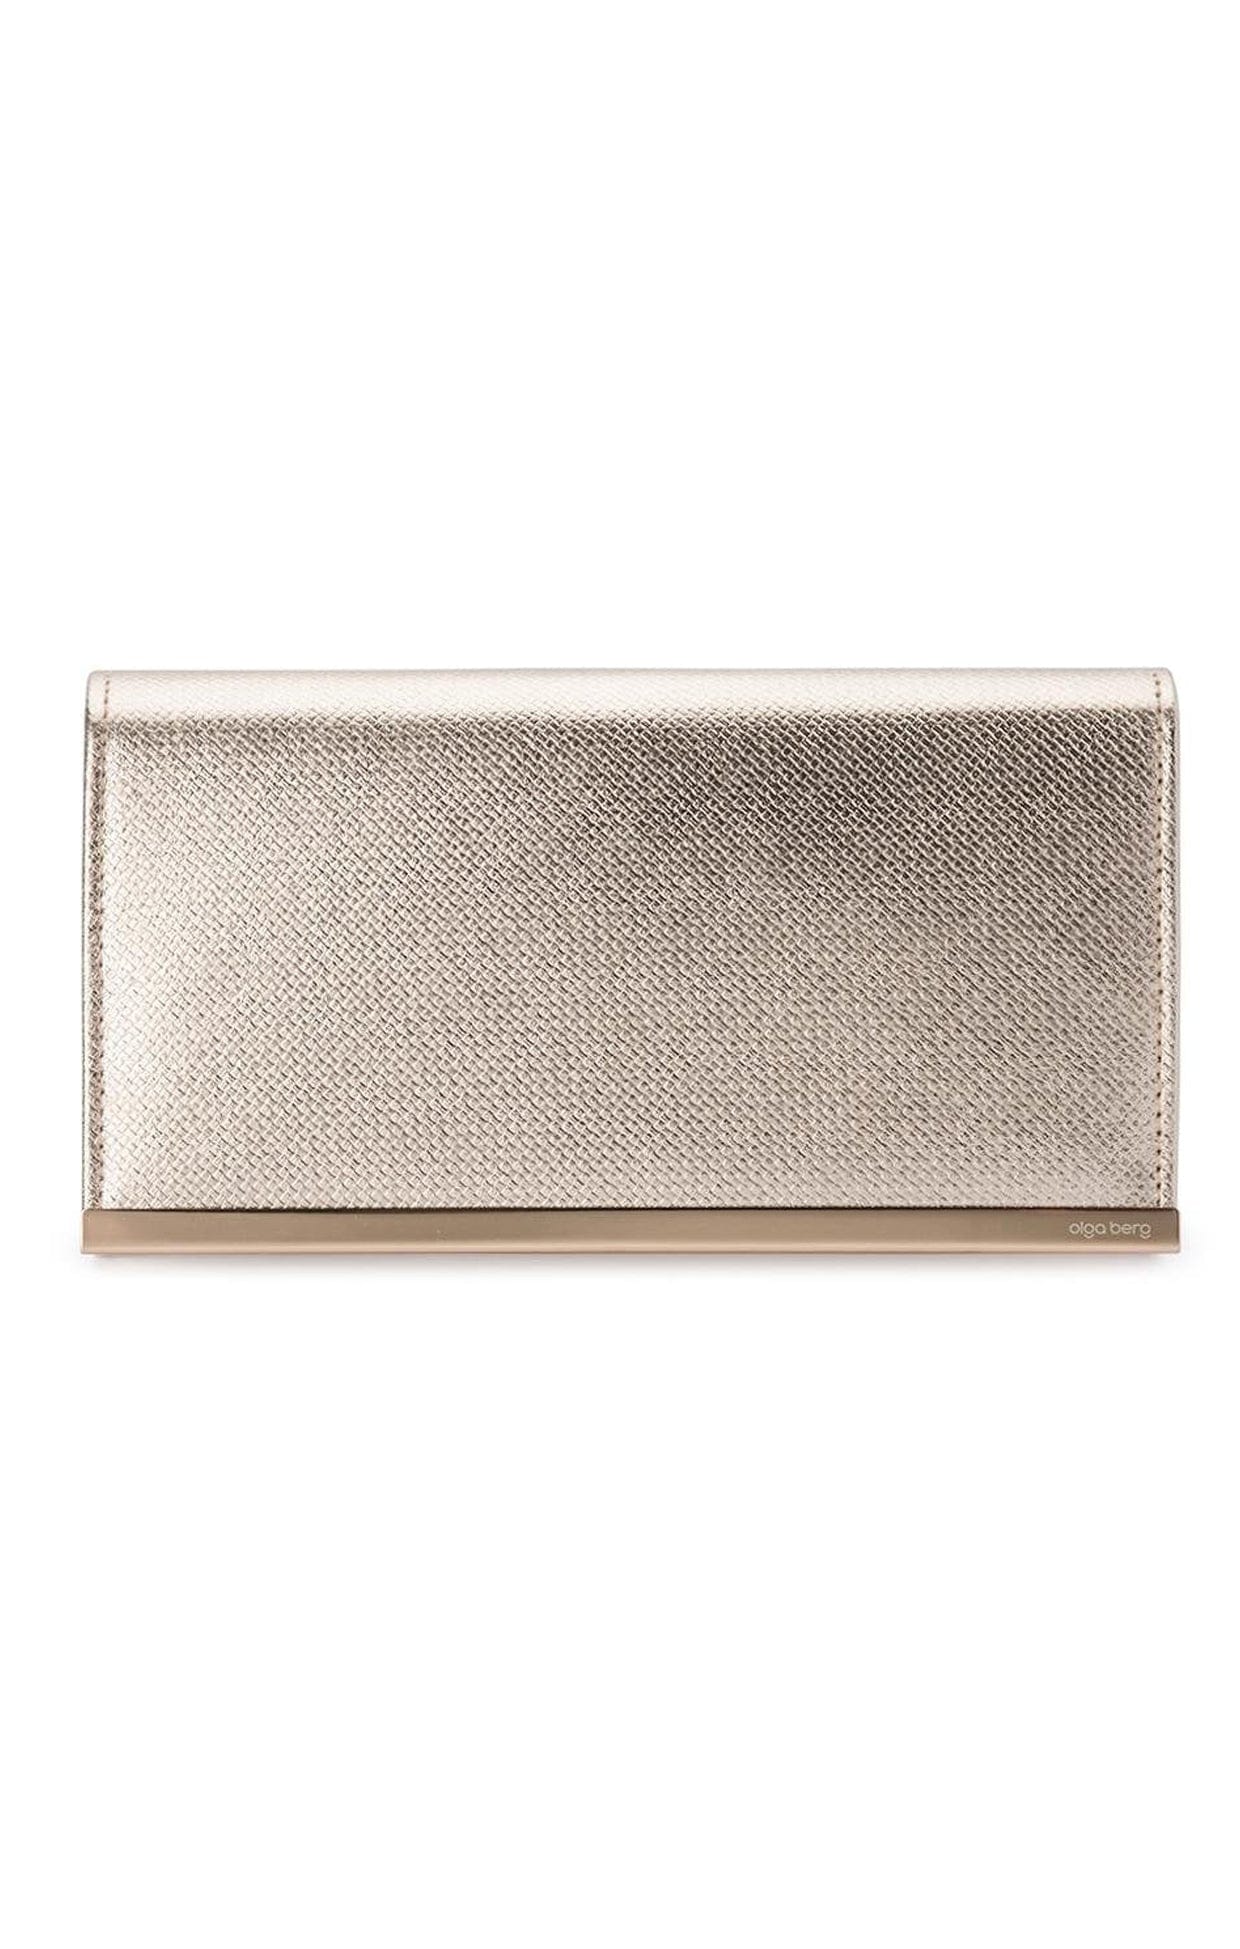 ACCESSORIES Bags Clutches One Size / Neutral MADDIE FOLDOVER CLUTCH IN GOLD